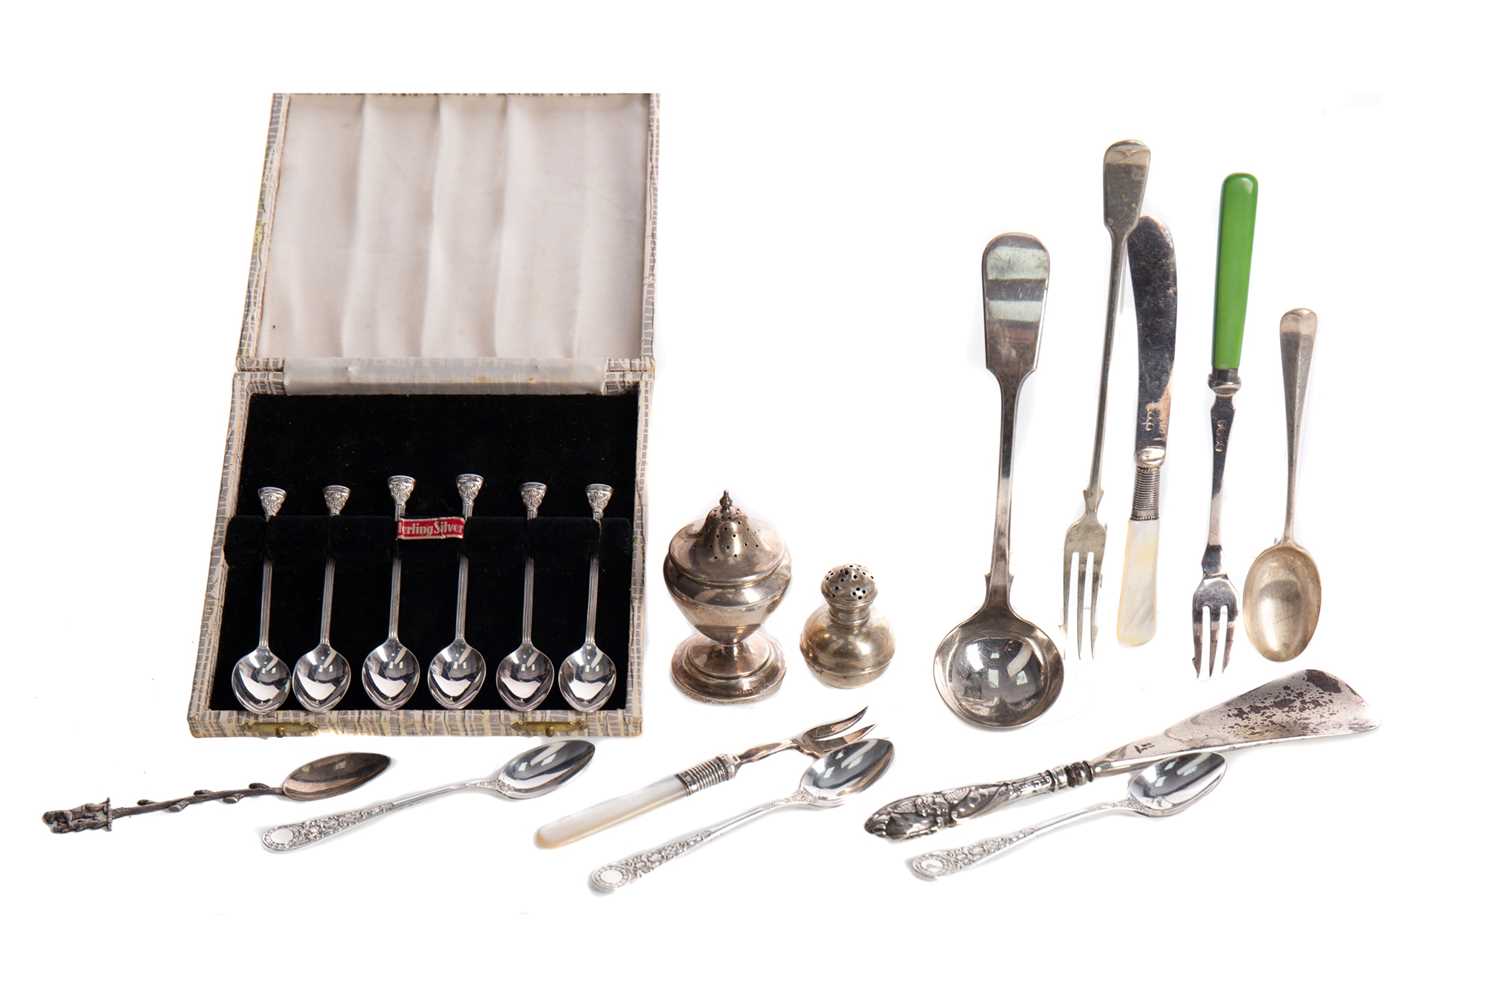 Lot 479 - A SET OF SIX AUSTRALIAN SILVER COFFEE SPOONS, ALONG WITH OTHER LOOSE SILVER AND PLATED FLATWARE